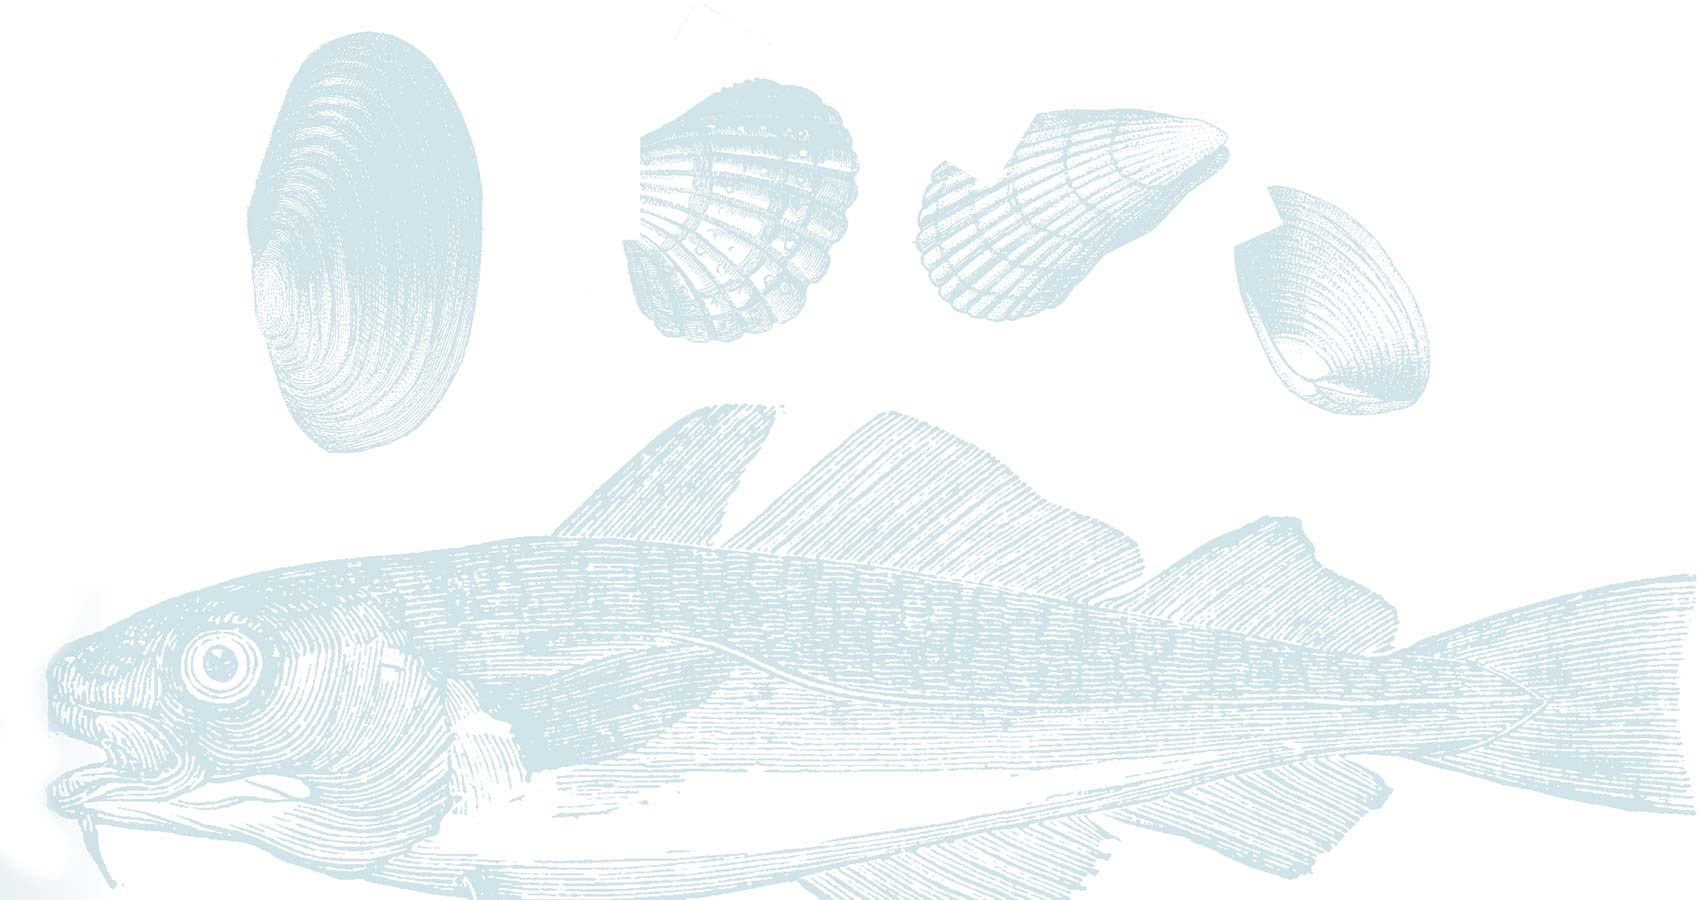 woodcut style illustration of a fish and shells